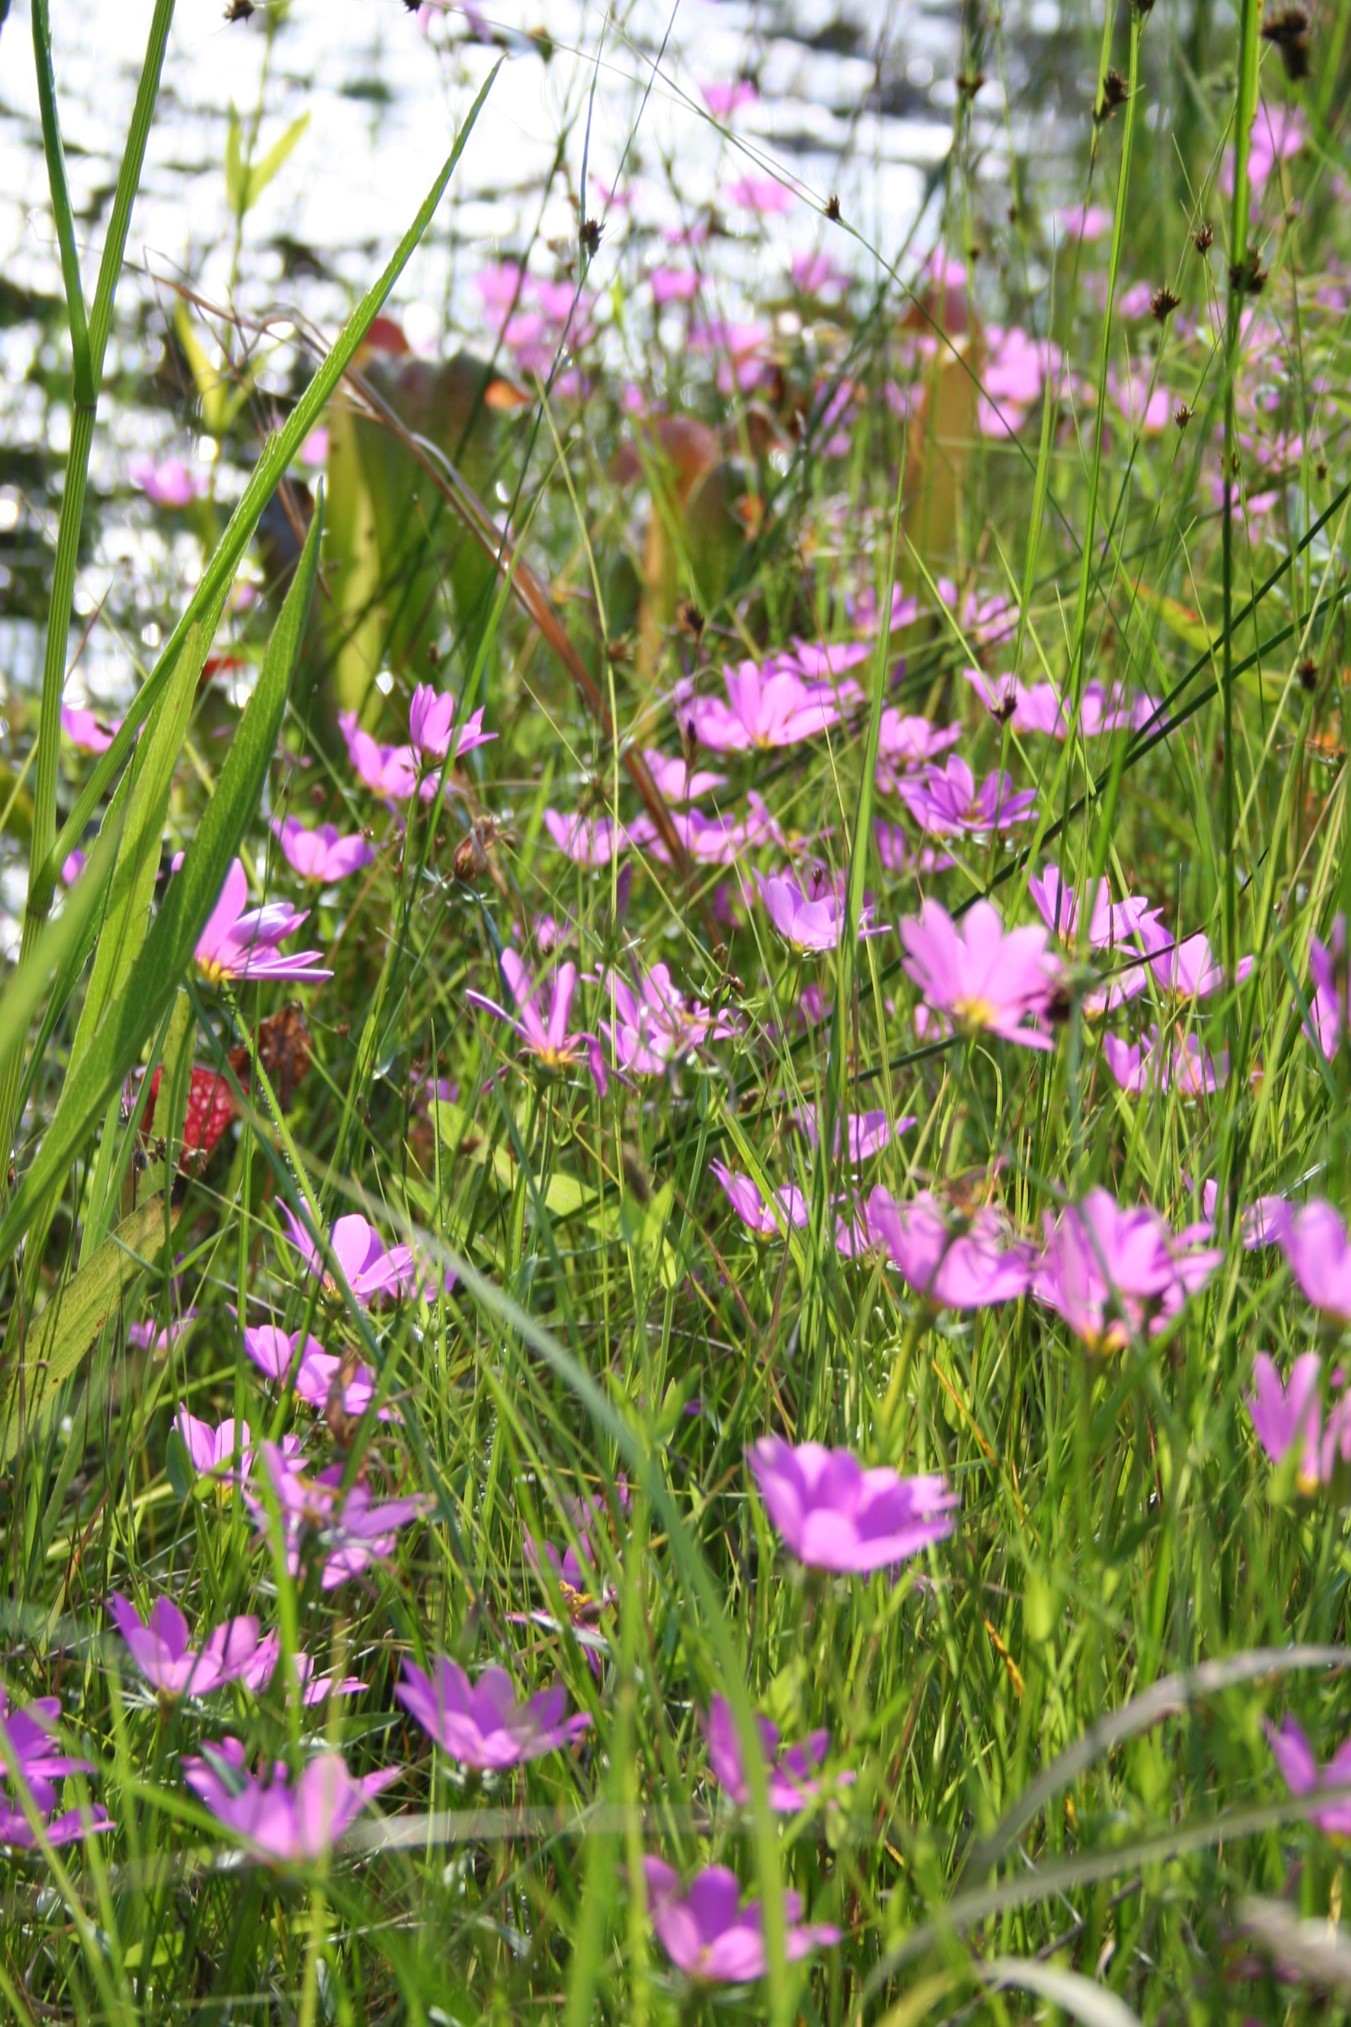 The Scientific Name is Sabatia dodecandra. You will likely hear them called Perennial Sea-pink, Large Marsh Rose-pink. This picture shows the Naturalized in a wetland pond edge of Sabatia dodecandra